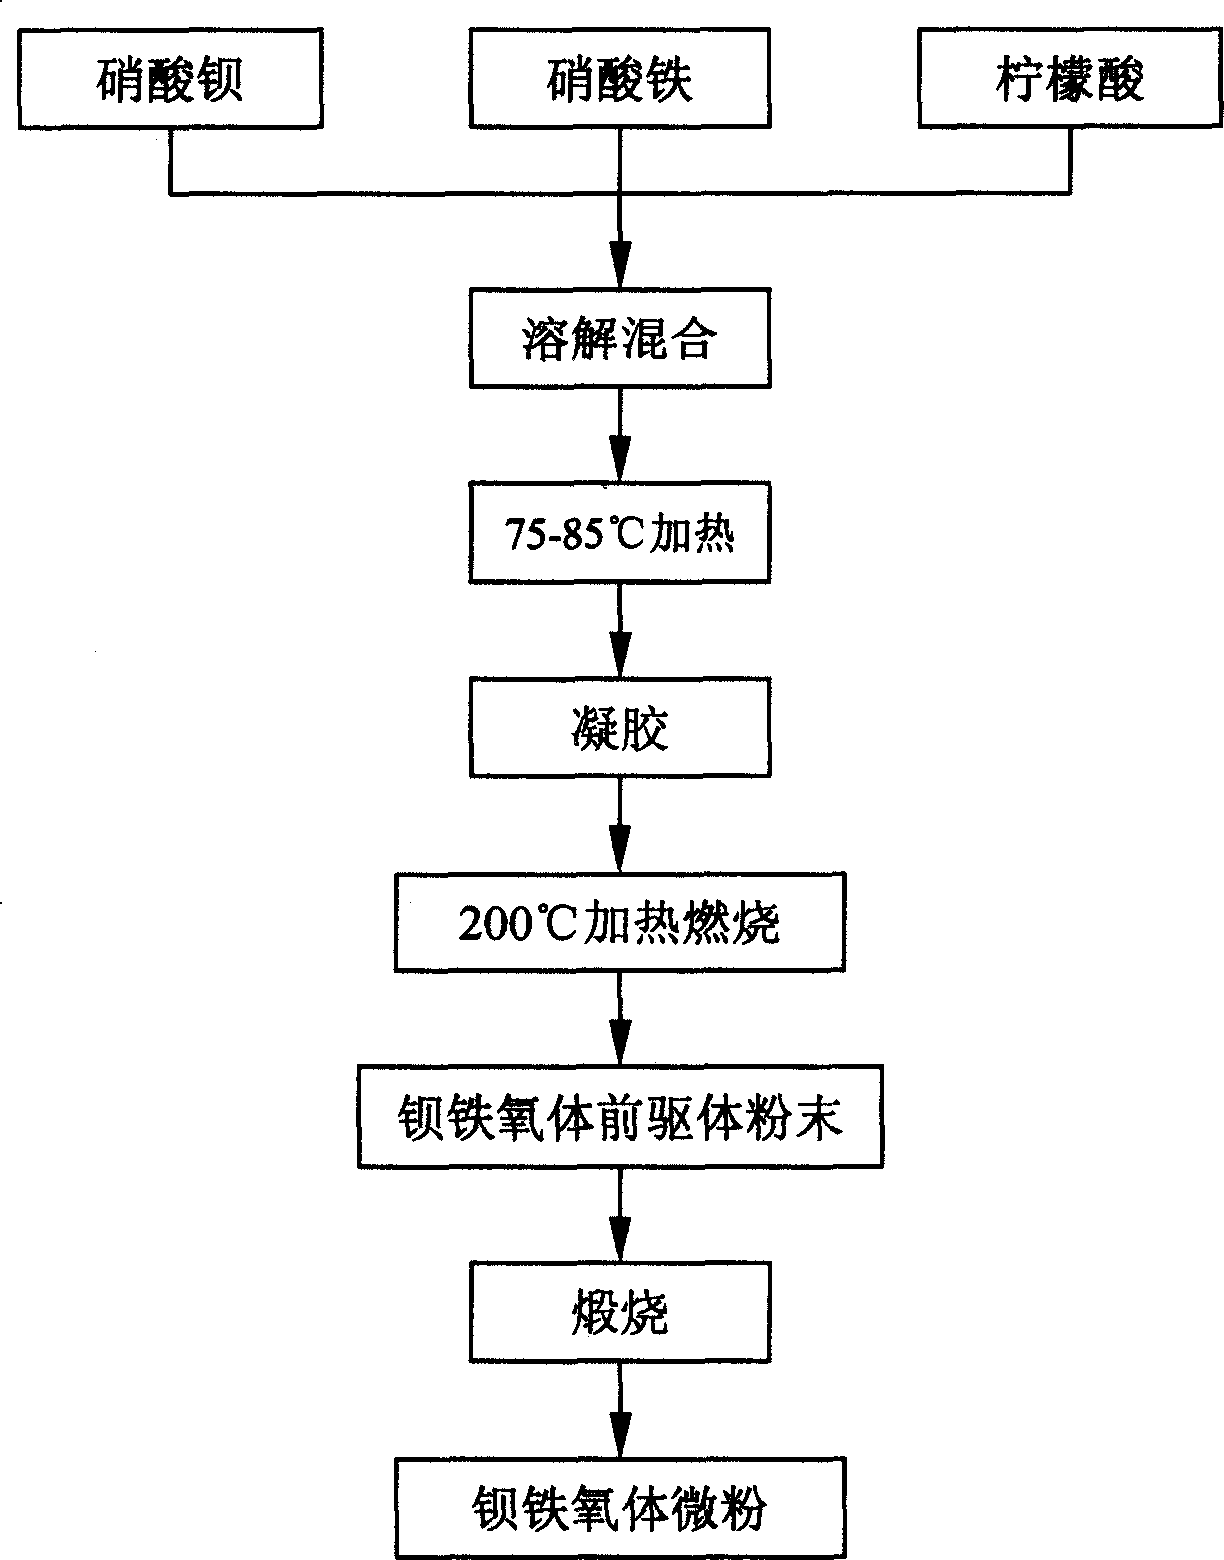 Process for synthesizing barium ferrite micro powder by self combustion method